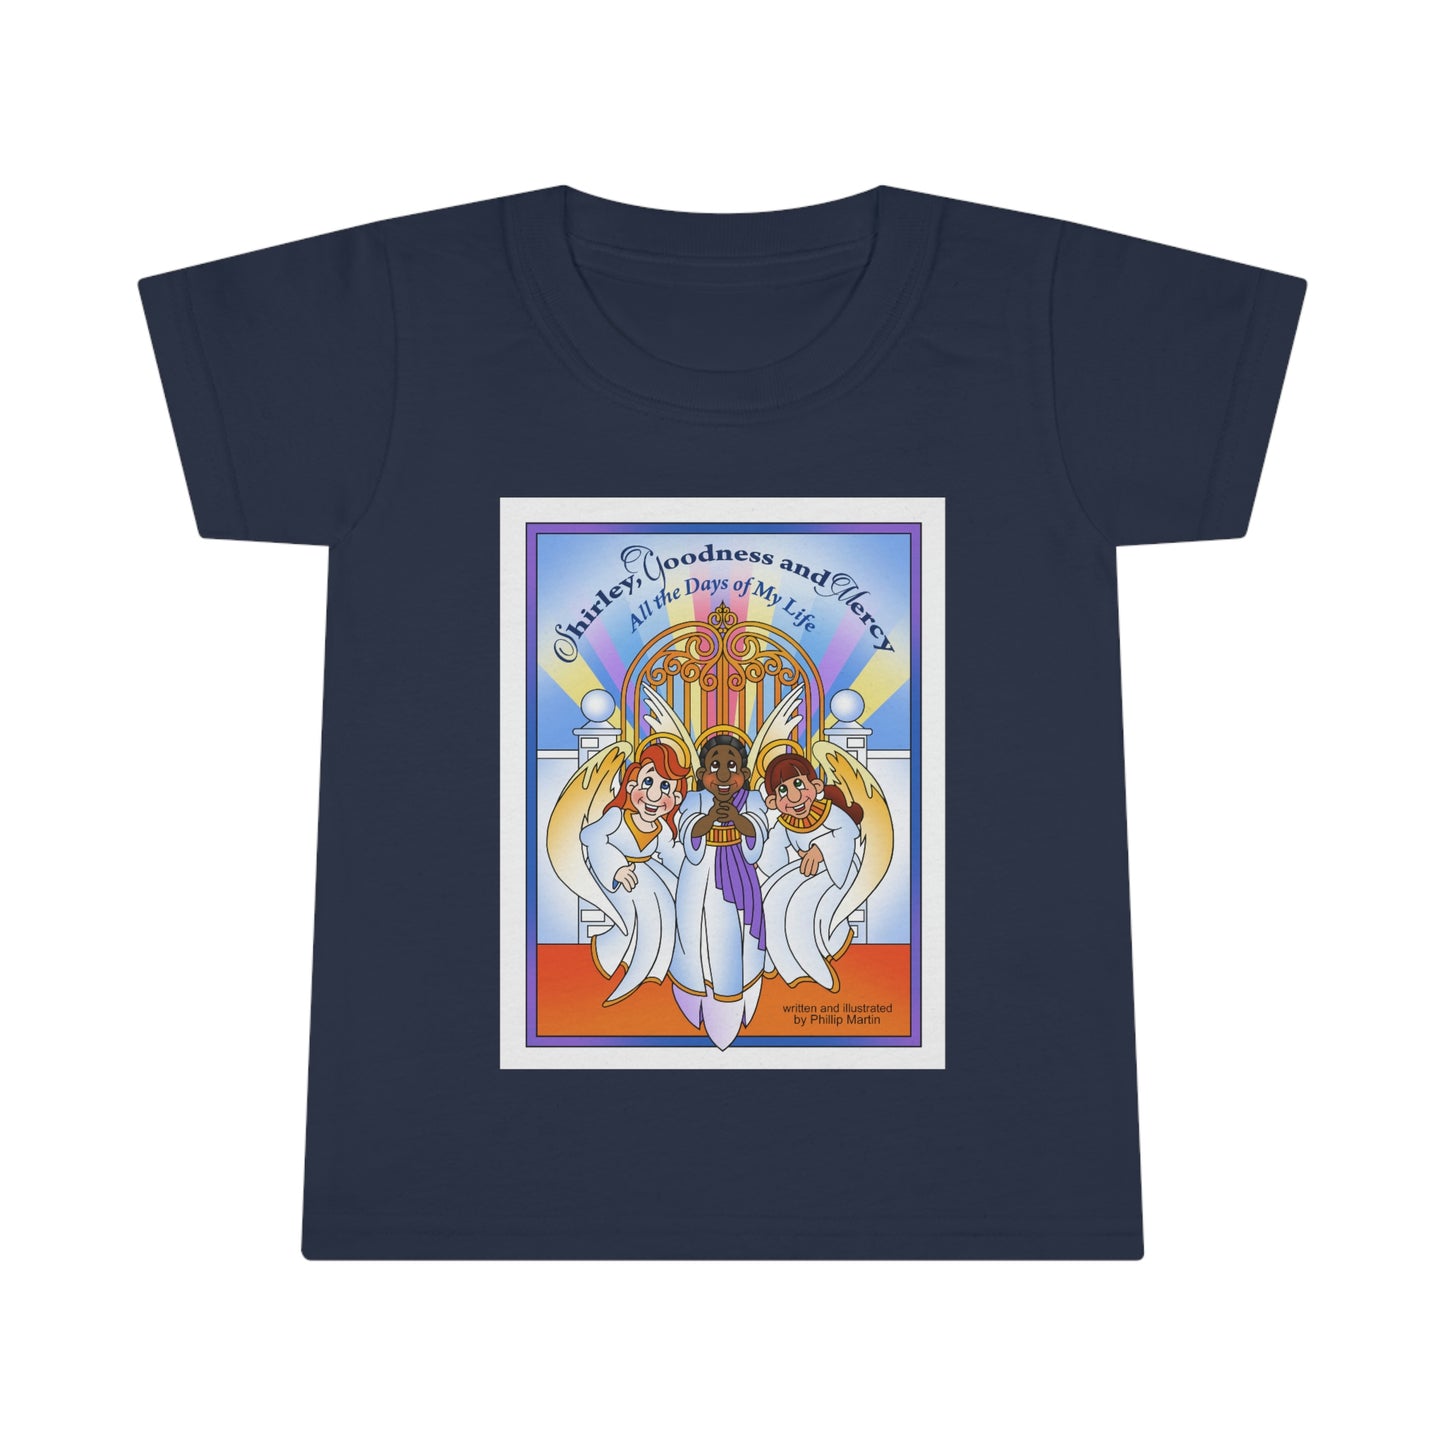 Shirley, Goodness, and Mercy Toddler T-shirt